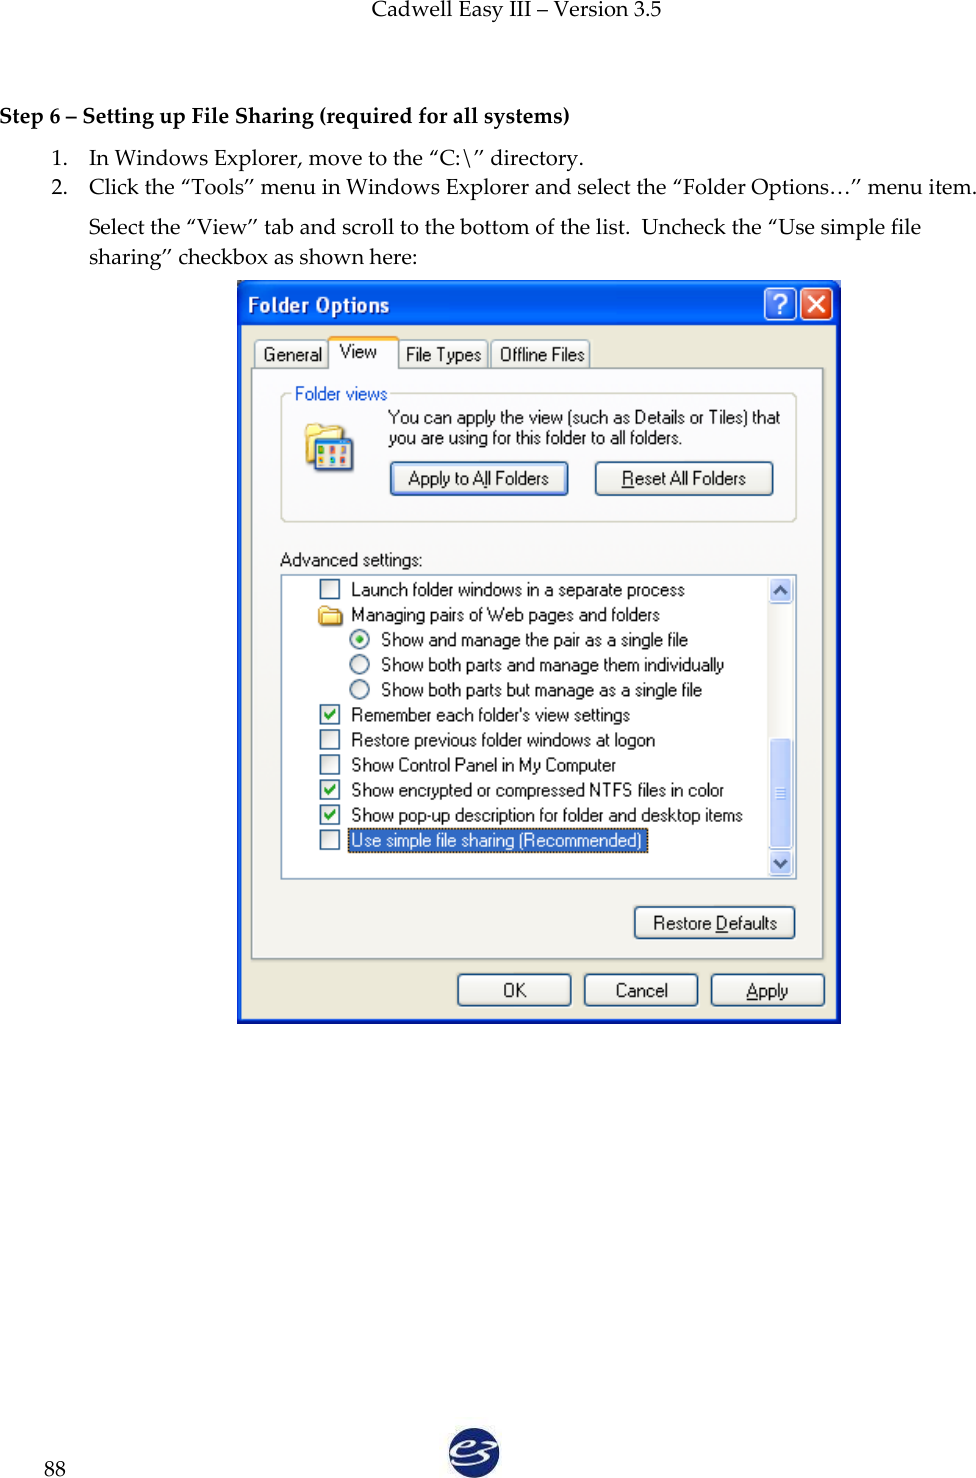 Cadwell Easy III – Version 3.5   88  Step 6 – Setting up File Sharing (required for all systems) 1. In Windows Explorer, move to the ‚C:\‛ directory.   2. Click the ‚Tools‛ menu in Windows Explorer and select the ‚Folder Options…‛ menu item. Select the ‚View‛ tab and scroll to the bottom of the list.  Uncheck the ‚Use simple file sharing‛ checkbox as shown here:    